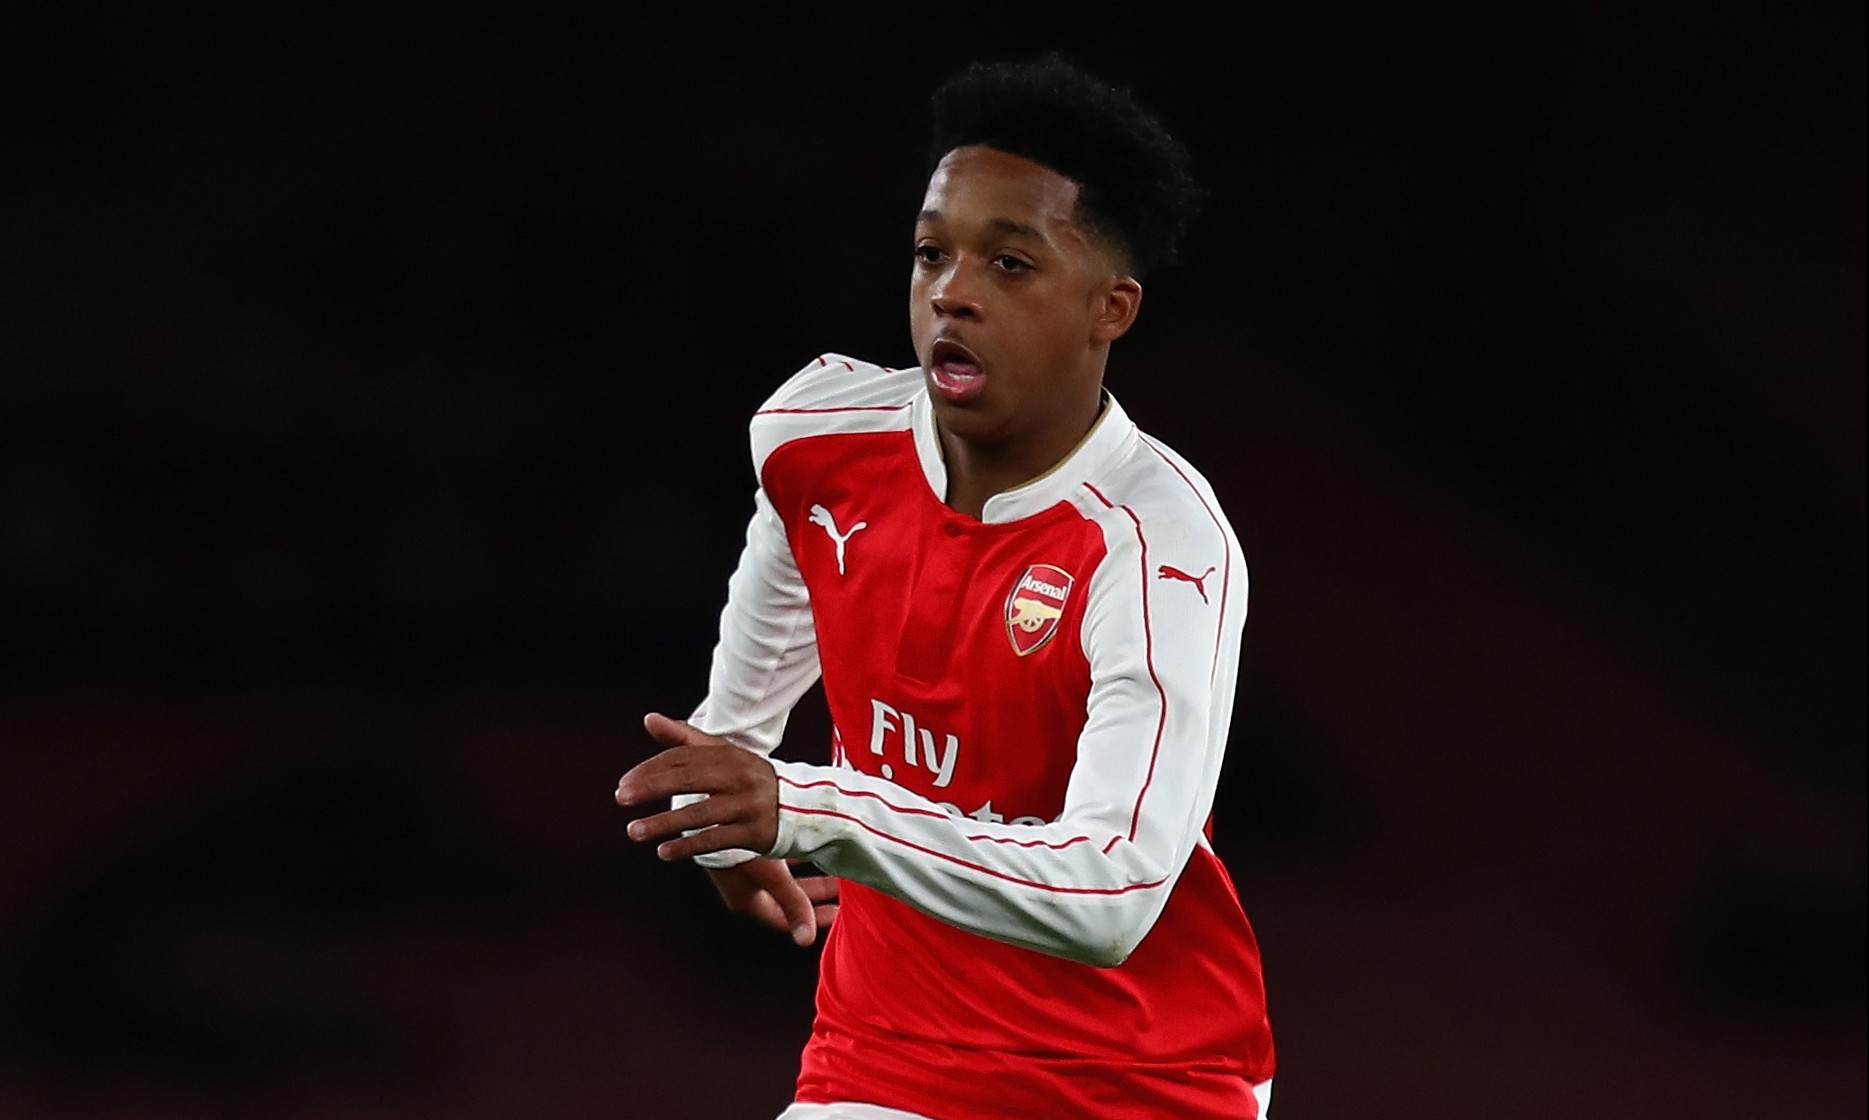 LONDON, ENGLAND - APRIL 04:  Chris Willock of Arsenal in action during the FA Youth Cup semi-final second leg match between Arsenal and Manchester City at Emirates Stadium on April 4, 2016 in London, England.  (Photo by Julian Finney/Getty Images)